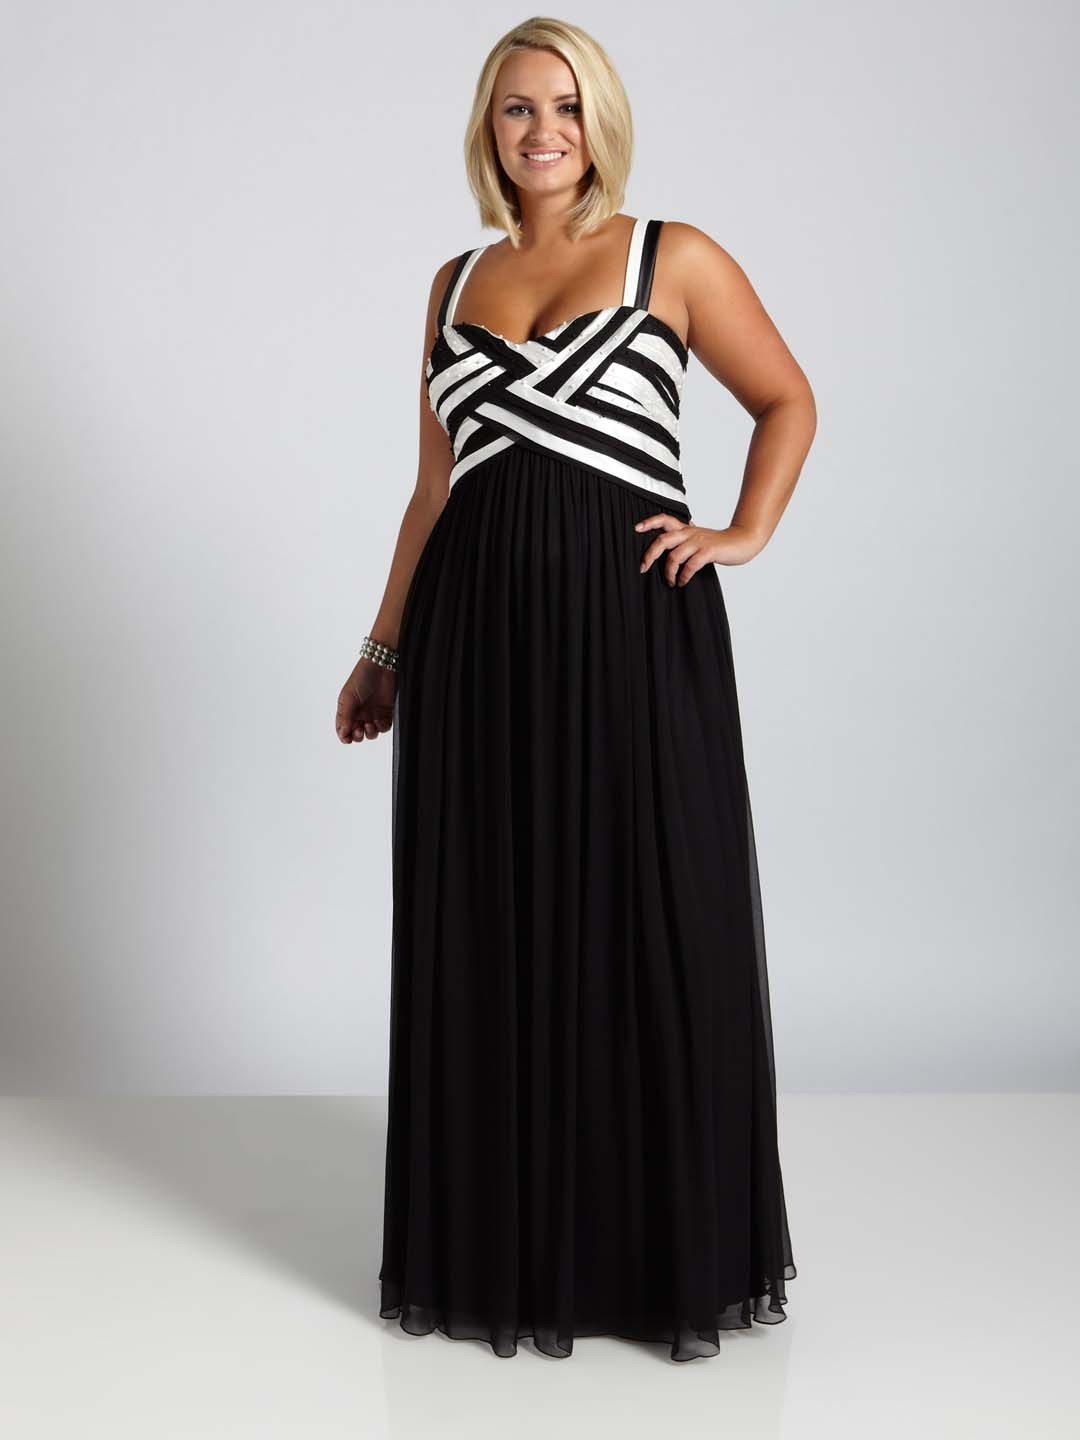 Plus Sizes Evening Dresses for Your Outfit Wedding, Dresses and Much